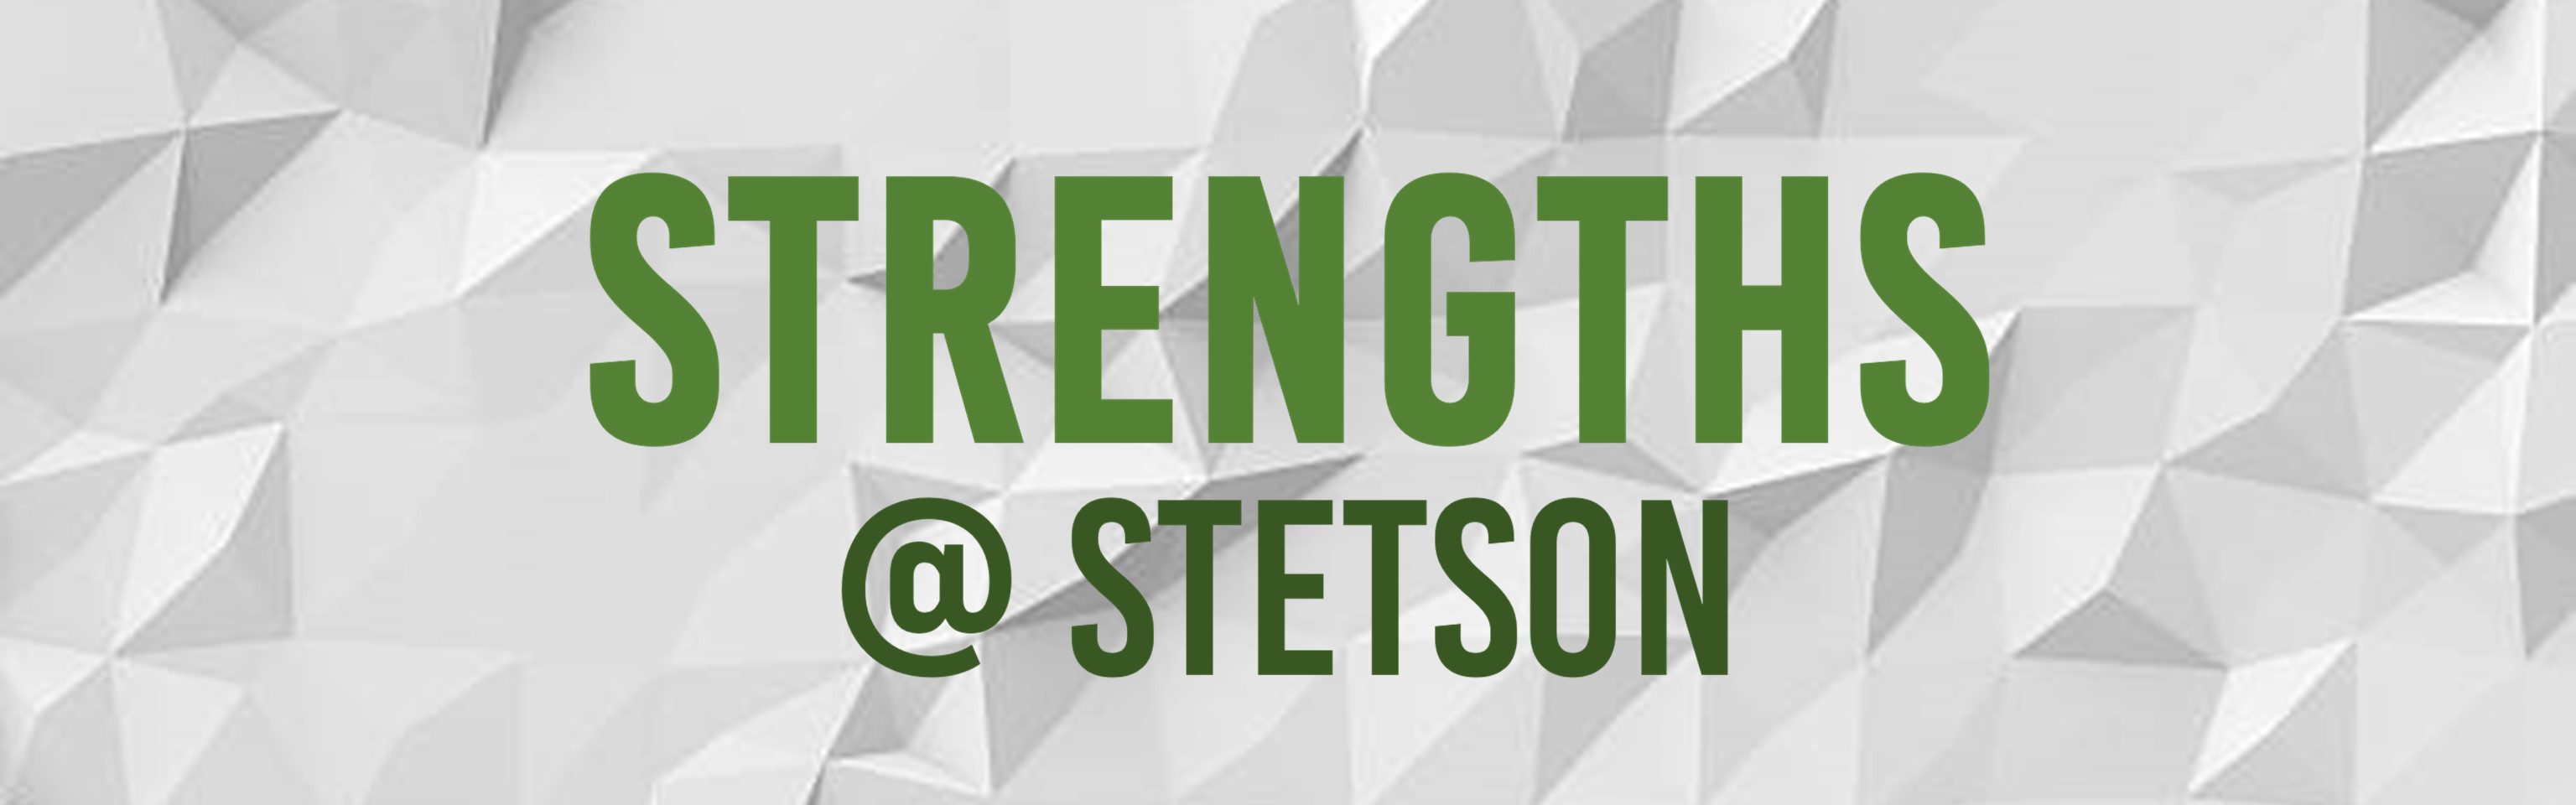 Strengths at Stetson Wordmark on texture white background